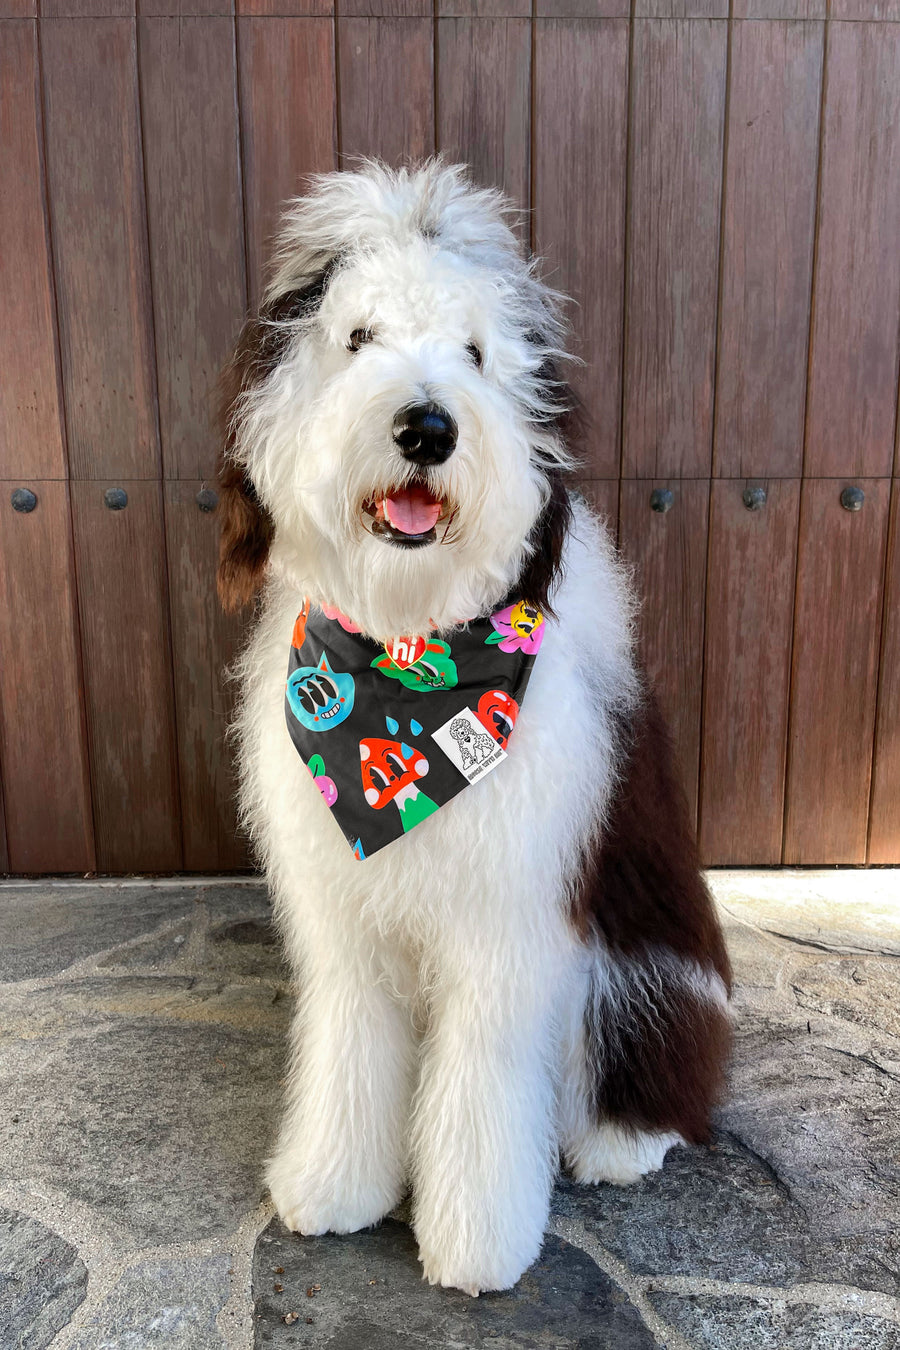 Dog Bandana One Up - Customize with Interchangeable Velcro Patches